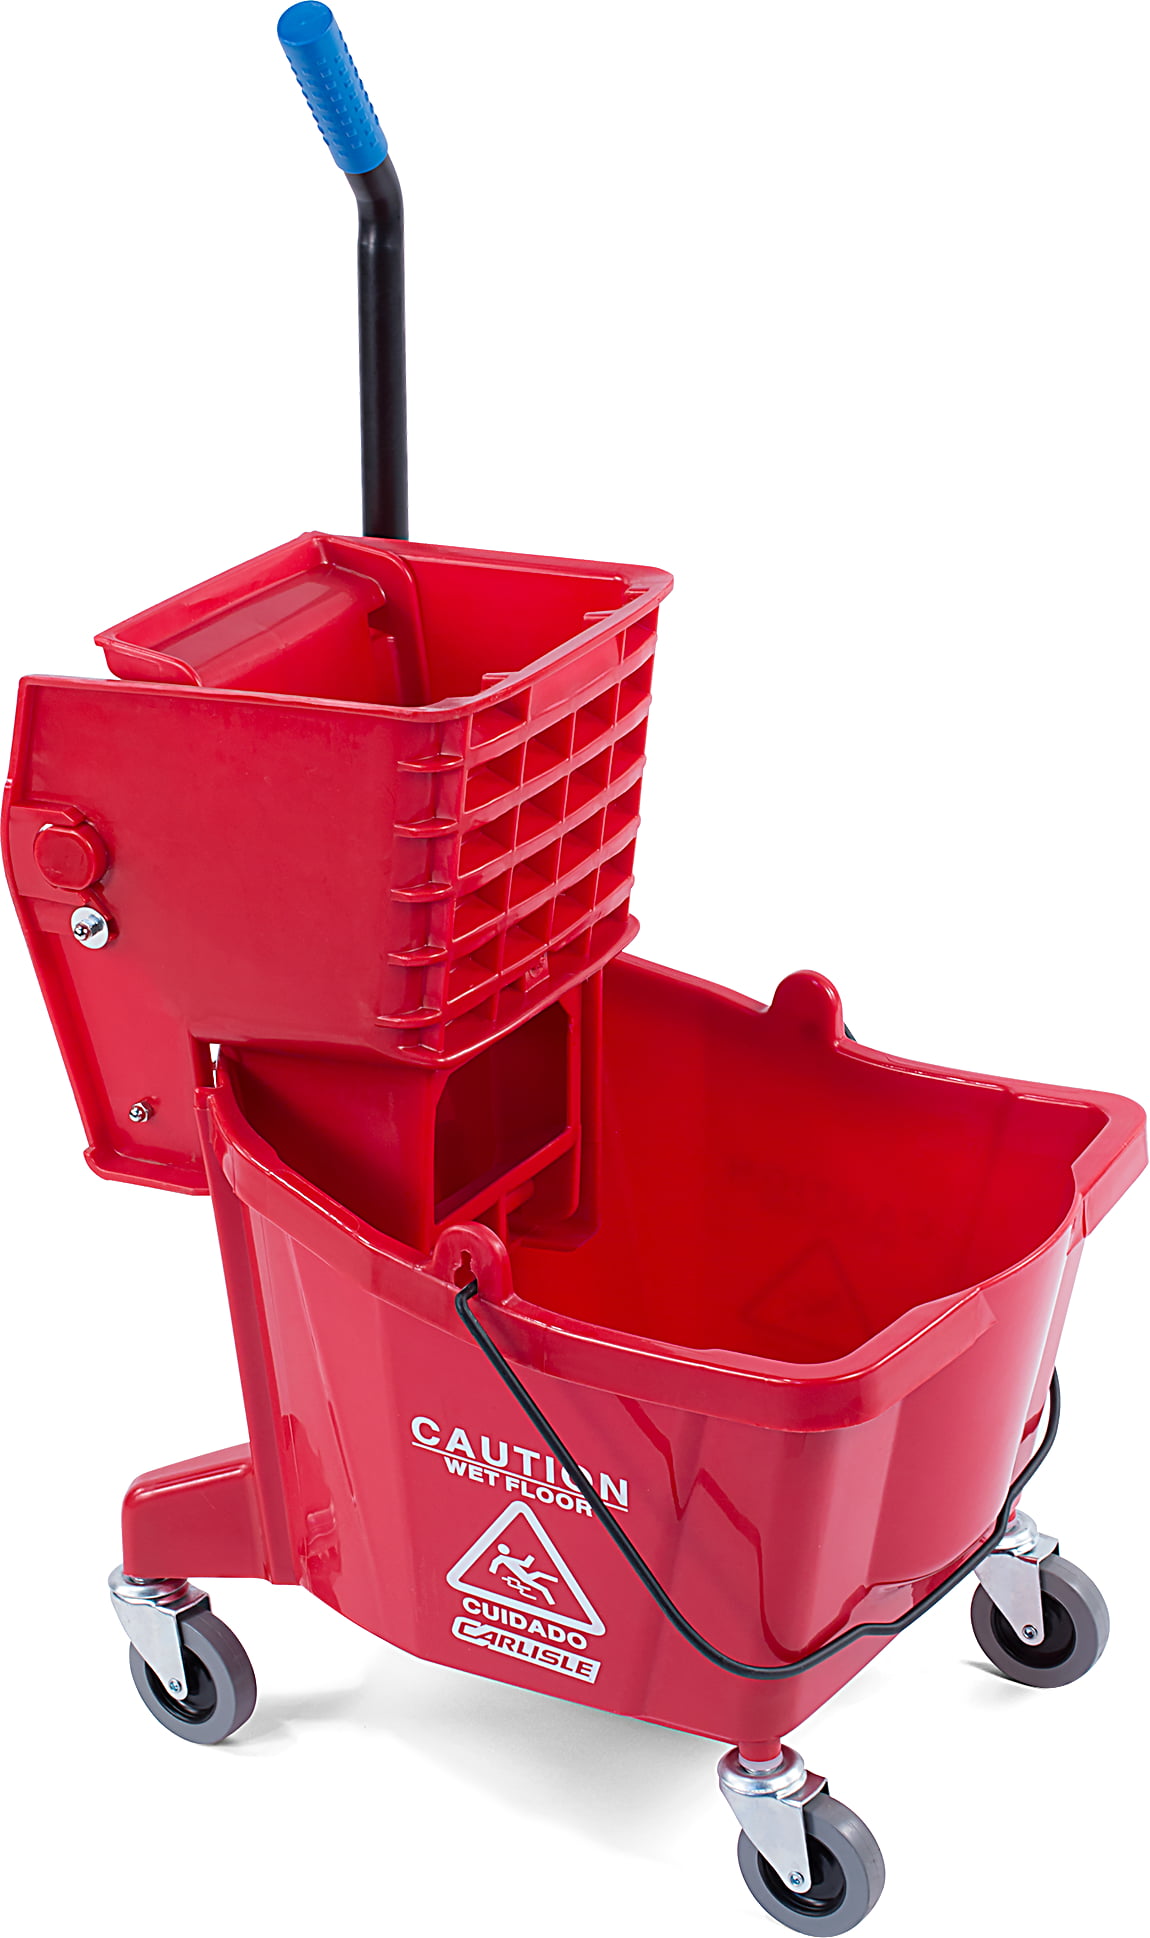 2 Rolling Mop buckets with Wringers- Commercial grade 2 for 25 -  business/commercial - by owner - sale - craigslist